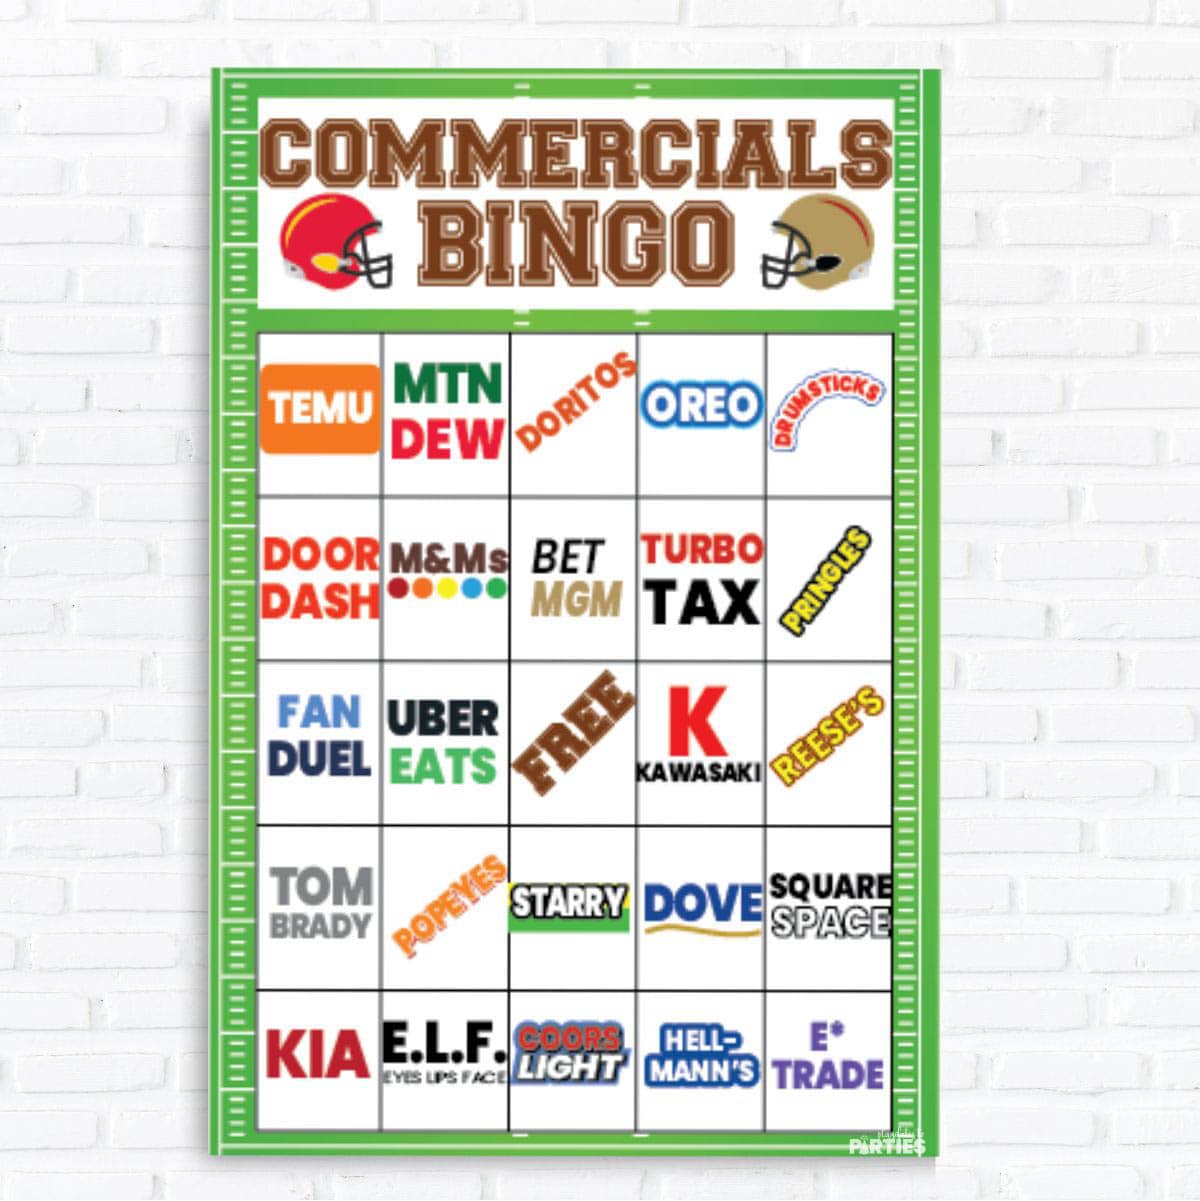 Football commercials bingo card with advertiser names.